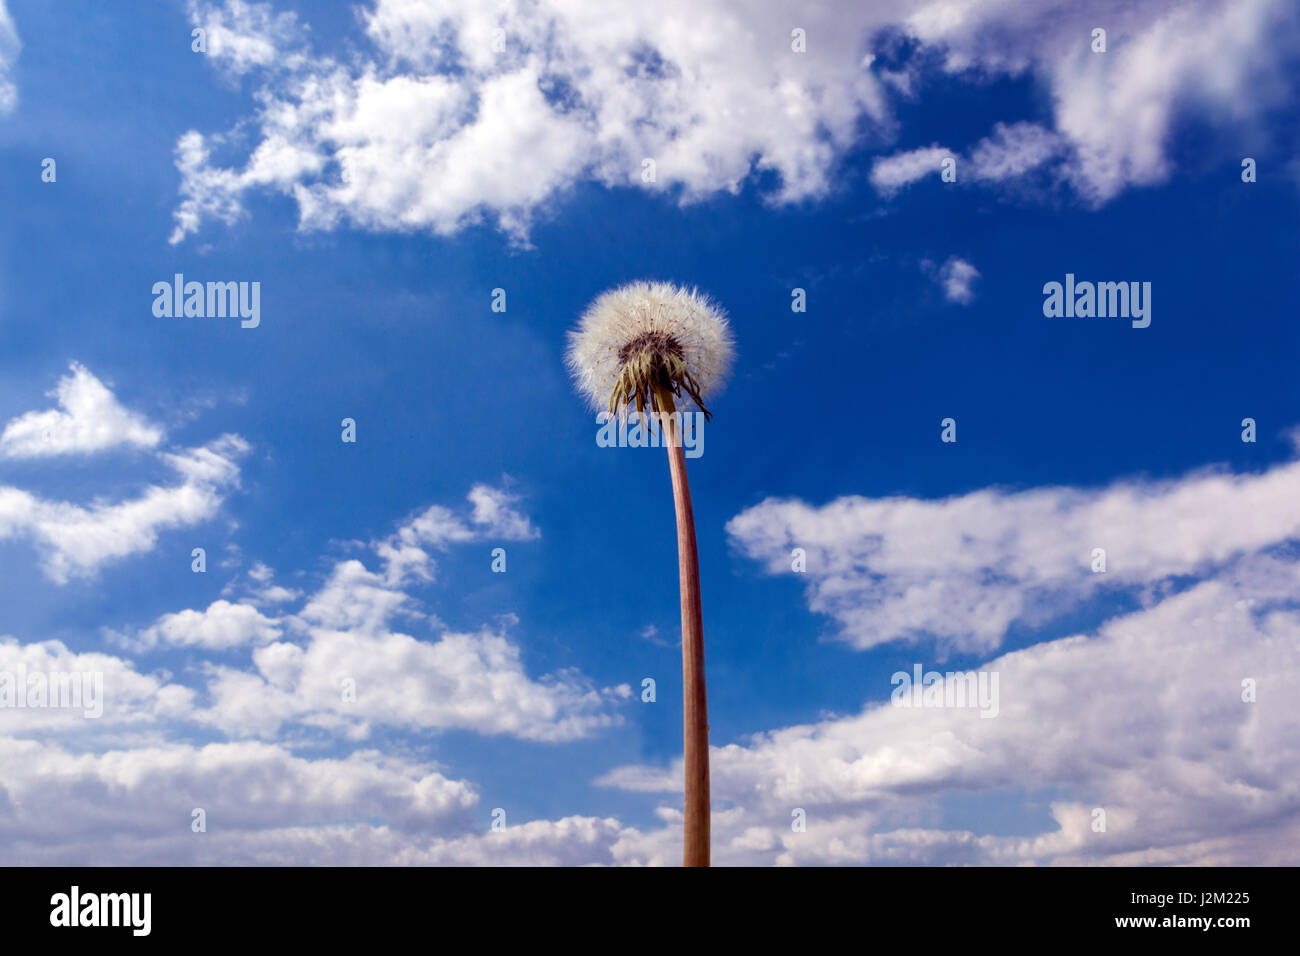 Dandelion seed head with seeds on the stem, blue sky background cloudscape Taraxacum officinale looking up to sky plant Stock Photo